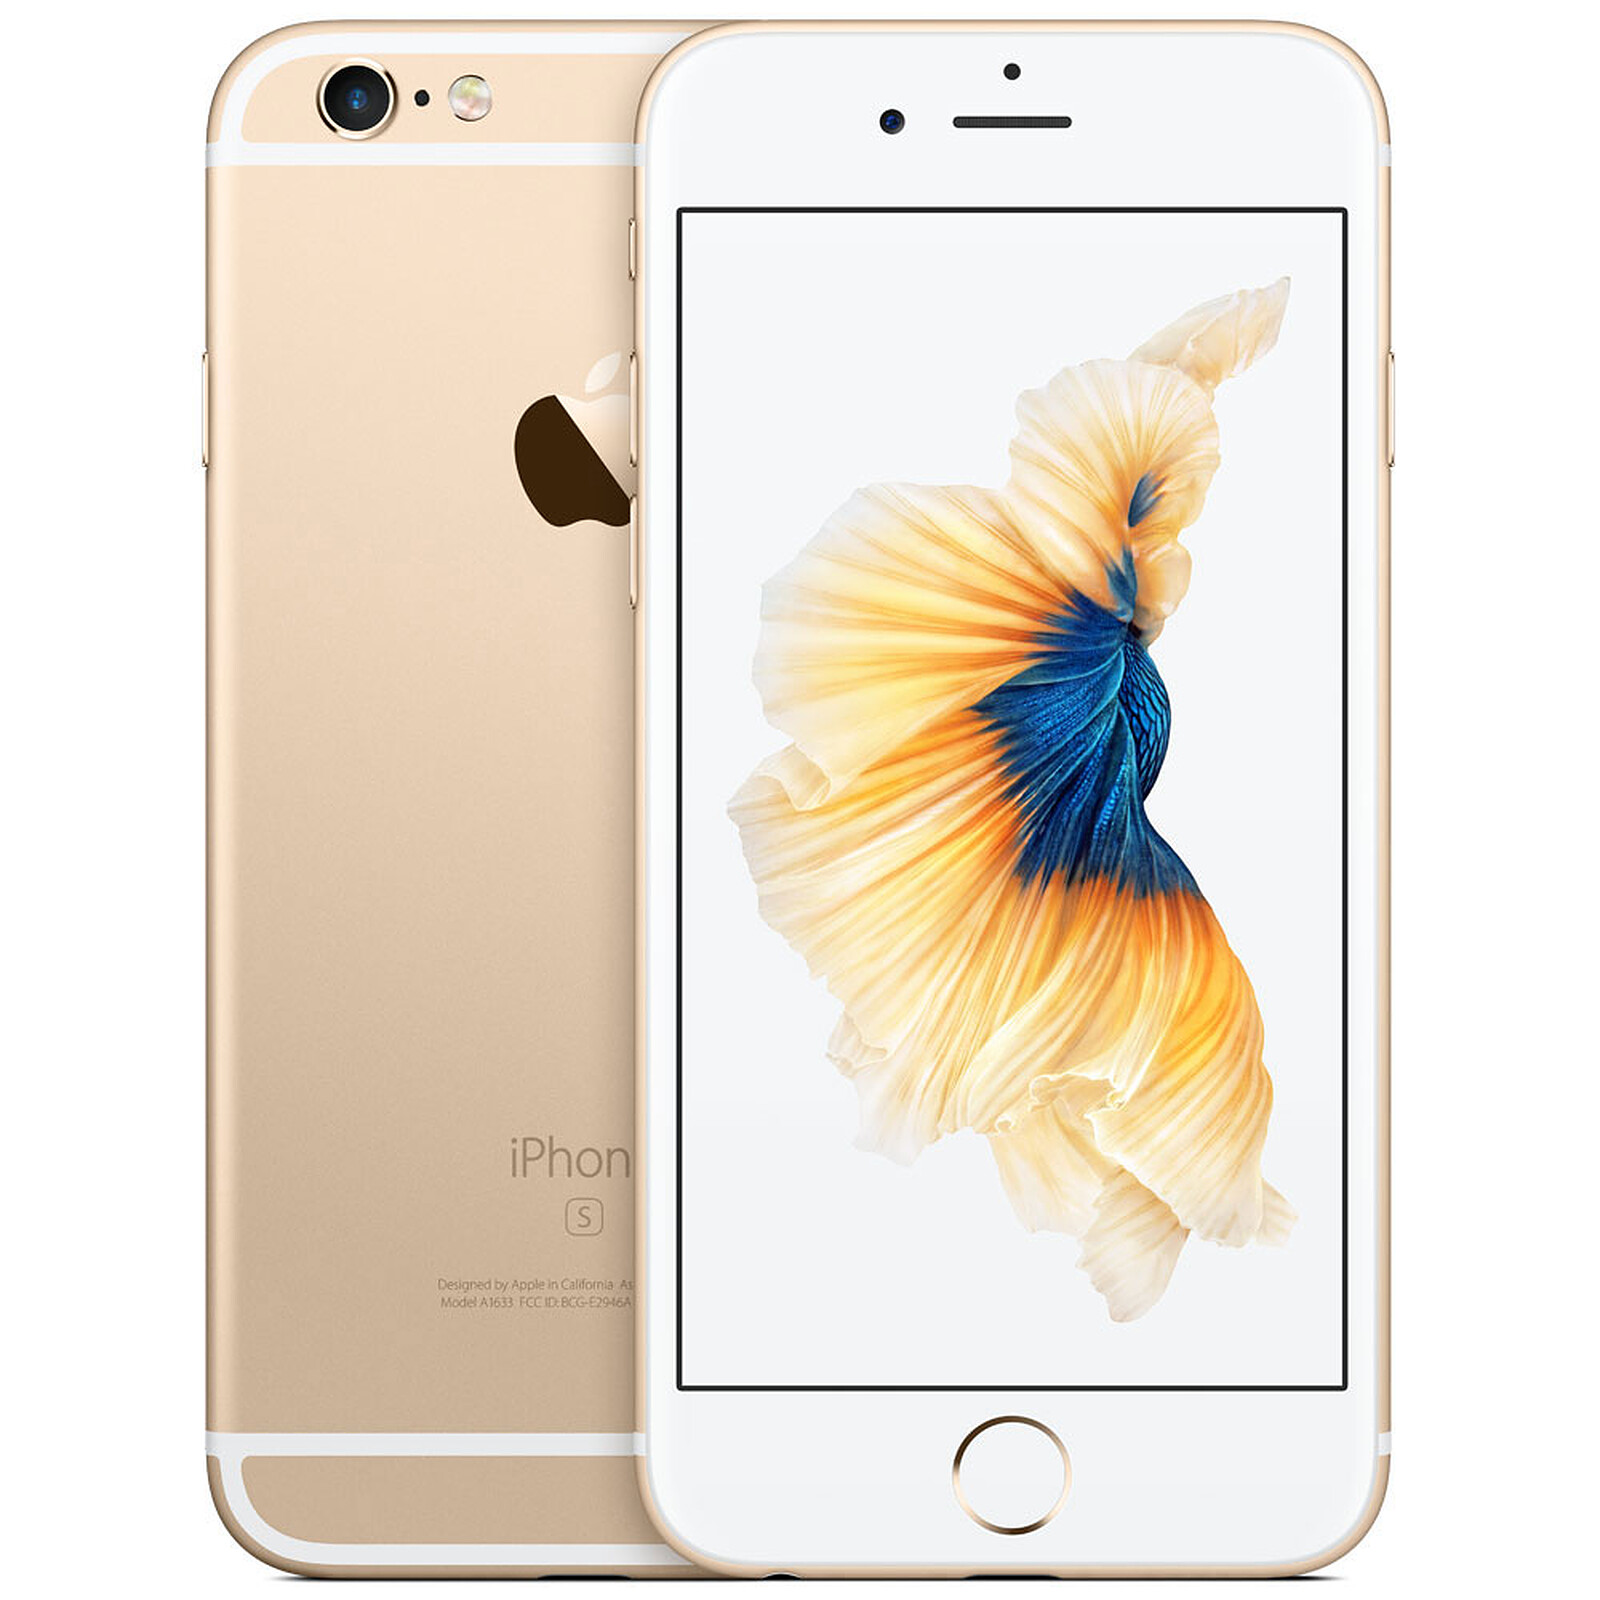 Apple iPhone 6s 128GB Gold - Mobile phone & smartphone - LDLC 3